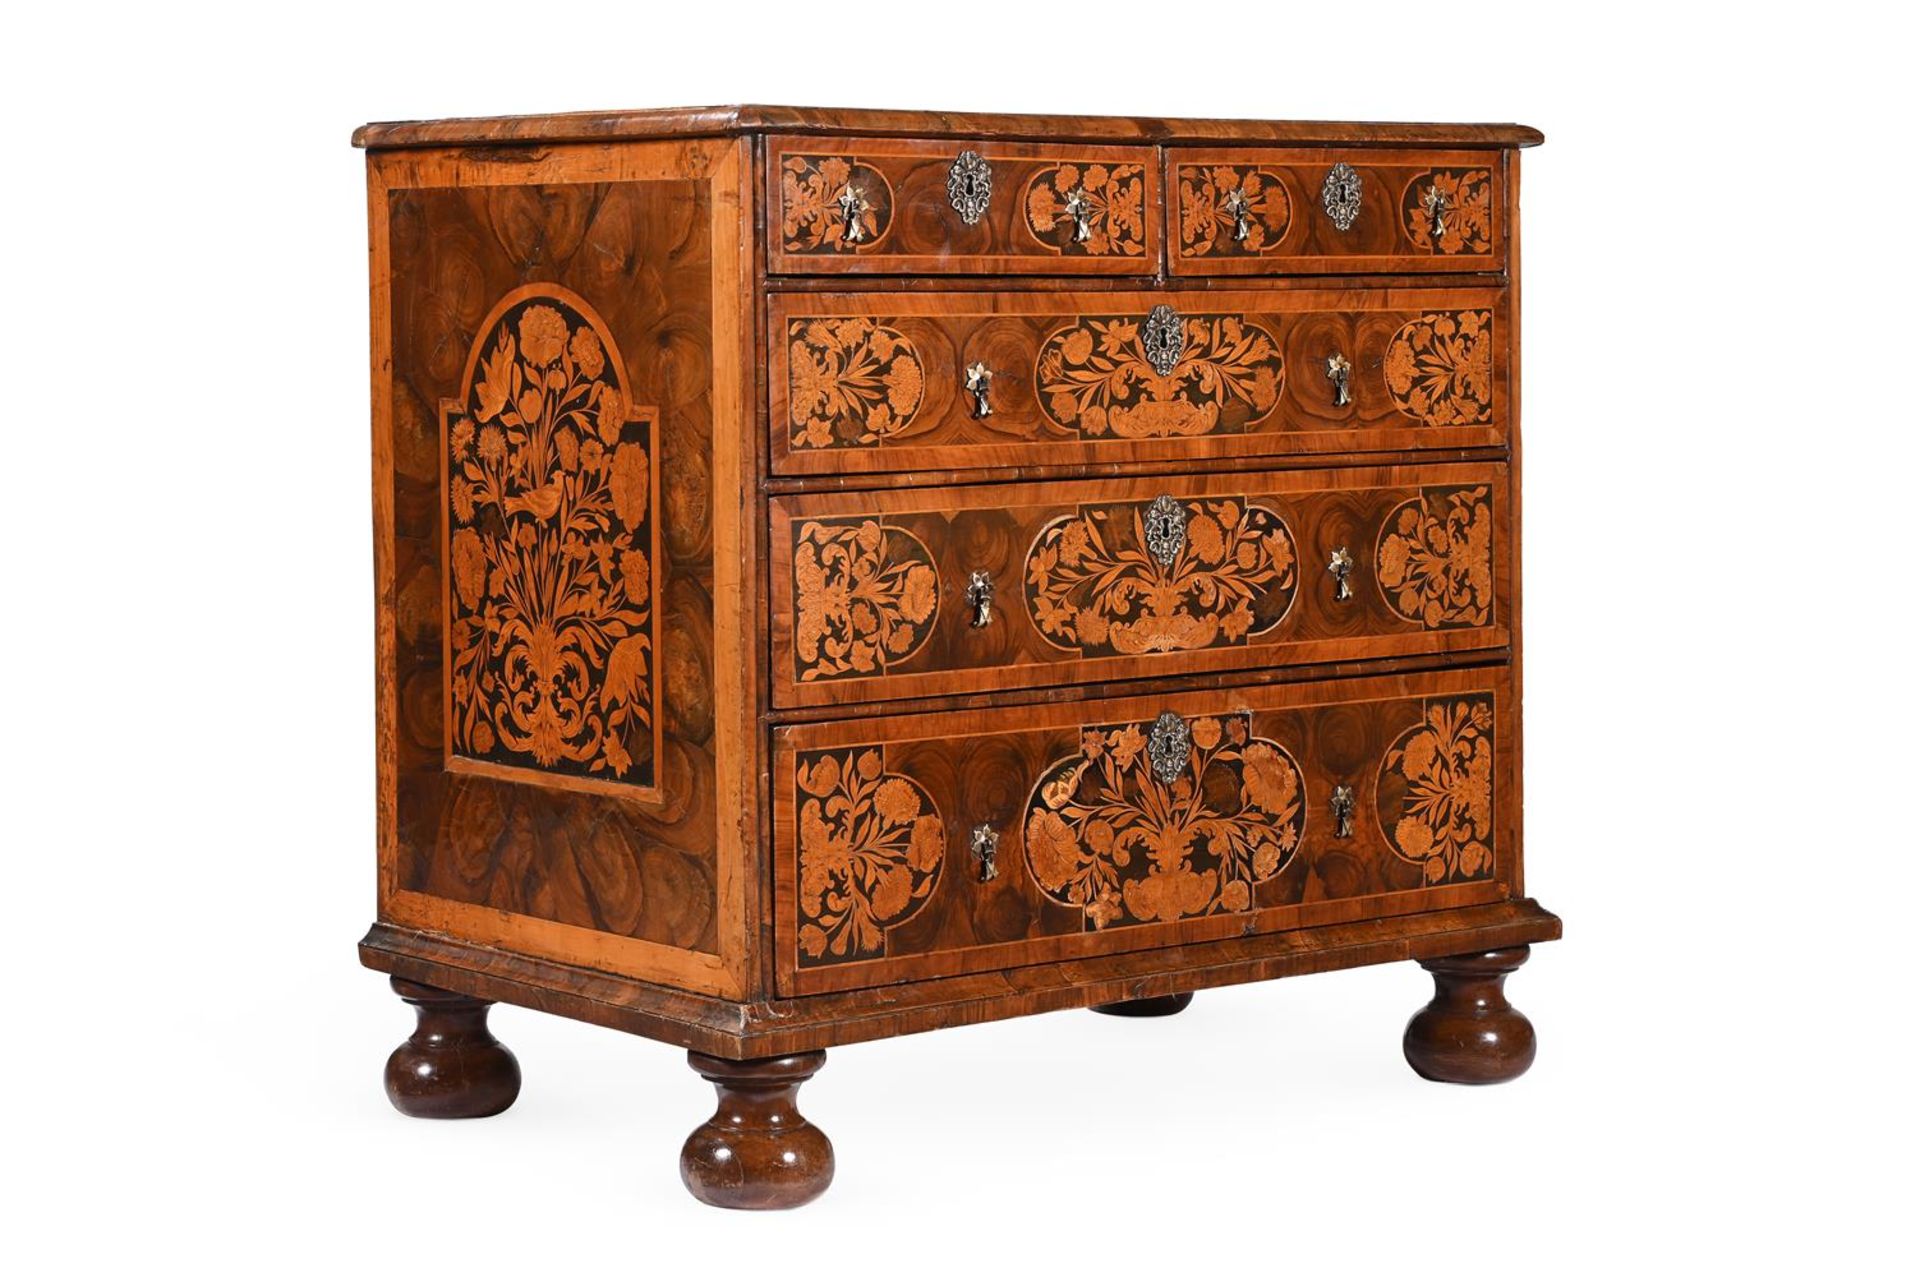 A CHARLES II OLIVEWOOD, WALNUT, FRUITWOOD OYSTER VENEERED AND MARQUETRY CHEST OF DRAWERS, CIRCA 1680 - Image 4 of 5